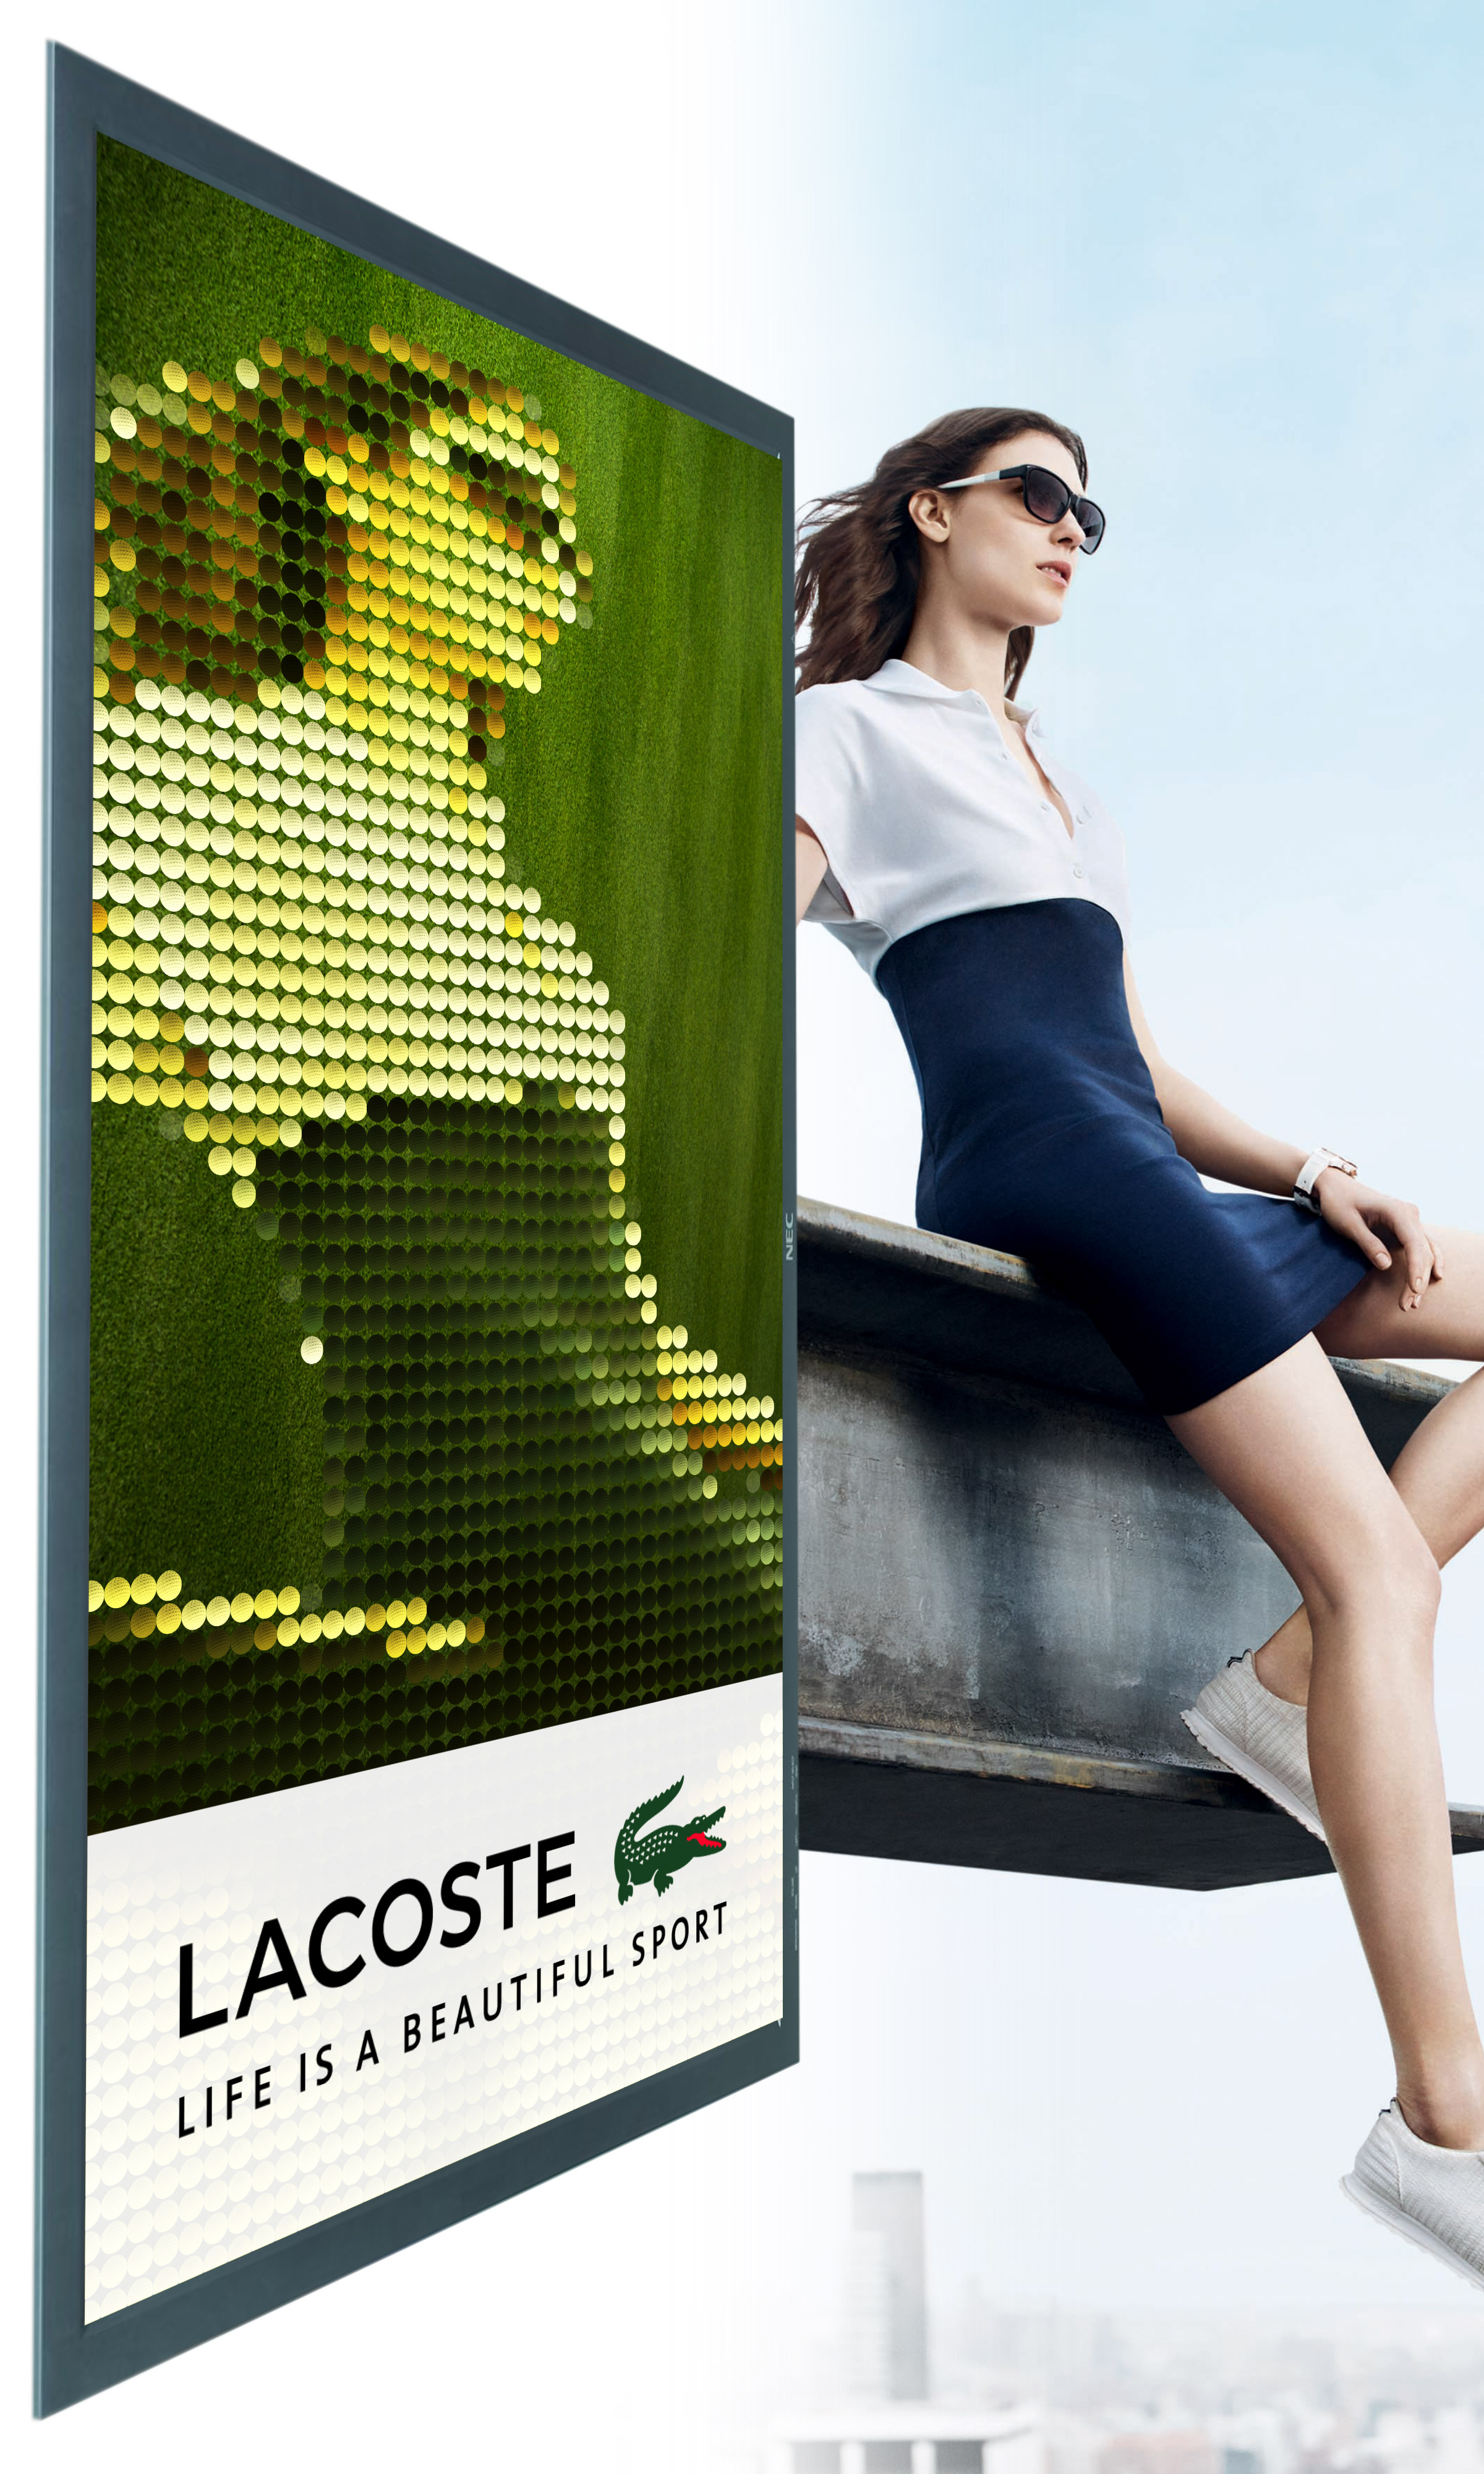 Lacoste: Life’s a Beautiful Sport